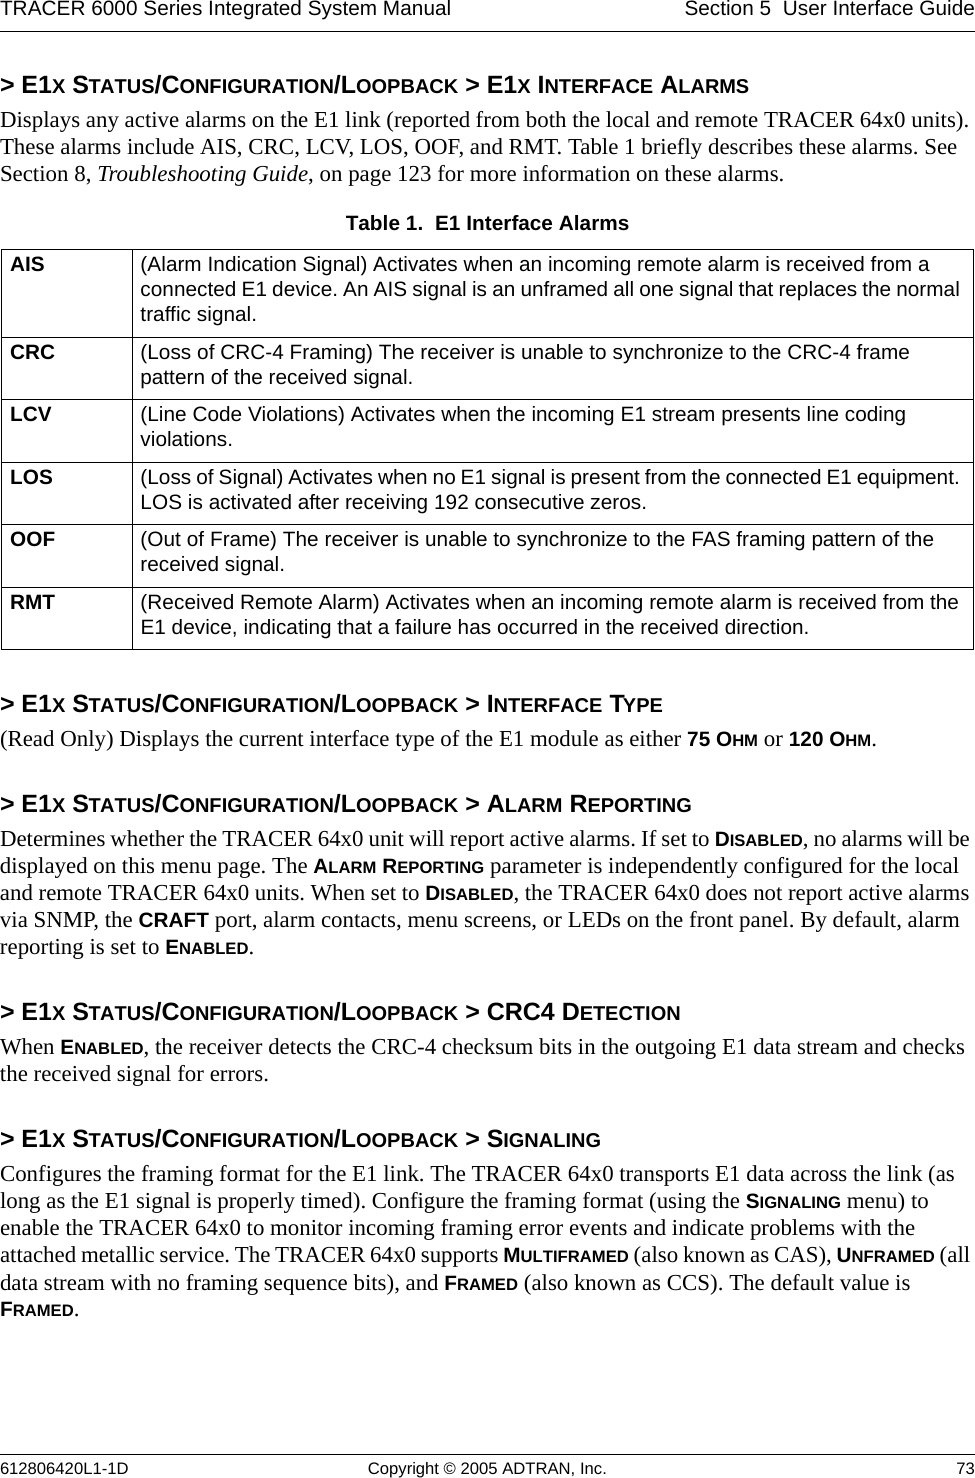 TRACER 6000 Series Integrated System Manual Section 5  User Interface Guide612806420L1-1D Copyright © 2005 ADTRAN, Inc. 73&gt; E1X STATUS/CONFIGURATION/LOOPBACK &gt; E1X INTERFACE ALARMSDisplays any active alarms on the E1 link (reported from both the local and remote TRACER 64x0 units). These alarms include AIS, CRC, LCV, LOS, OOF, and RMT. Table 1 briefly describes these alarms. See Section 8, Troubleshooting Guide, on page 123 for more information on these alarms.&gt; E1X STATUS/CONFIGURATION/LOOPBACK &gt; INTERFACE TYPE(Read Only) Displays the current interface type of the E1 module as either 75 OHM or 120 OHM.&gt; E1X STATUS/CONFIGURATION/LOOPBACK &gt; ALARM REPORTINGDetermines whether the TRACER 64x0 unit will report active alarms. If set to DISABLED, no alarms will be displayed on this menu page. The ALARM REPORTING parameter is independently configured for the local and remote TRACER 64x0 units. When set to DISABLED, the TRACER 64x0 does not report active alarms via SNMP, the CRAFT port, alarm contacts, menu screens, or LEDs on the front panel. By default, alarm reporting is set to ENABLED.&gt; E1X STATUS/CONFIGURATION/LOOPBACK &gt; CRC4 DETECTIONWhen ENABLED, the receiver detects the CRC-4 checksum bits in the outgoing E1 data stream and checks the received signal for errors.&gt; E1X STATUS/CONFIGURATION/LOOPBACK &gt; SIGNALINGConfigures the framing format for the E1 link. The TRACER 64x0 transports E1 data across the link (as long as the E1 signal is properly timed). Configure the framing format (using the SIGNALING menu) to enable the TRACER 64x0 to monitor incoming framing error events and indicate problems with the attached metallic service. The TRACER 64x0 supports MULTIFRAMED (also known as CAS), UNFRAMED (all data stream with no framing sequence bits), and FRAMED (also known as CCS). The default value is FRAMED.Table 1.  E1 Interface Alarms AIS (Alarm Indication Signal) Activates when an incoming remote alarm is received from a connected E1 device. An AIS signal is an unframed all one signal that replaces the normal traffic signal.CRC (Loss of CRC-4 Framing) The receiver is unable to synchronize to the CRC-4 frame pattern of the received signal.LCV (Line Code Violations) Activates when the incoming E1 stream presents line coding violations.LOS (Loss of Signal) Activates when no E1 signal is present from the connected E1 equipment. LOS is activated after receiving 192 consecutive zeros.OOF (Out of Frame) The receiver is unable to synchronize to the FAS framing pattern of the received signal.RMT (Received Remote Alarm) Activates when an incoming remote alarm is received from the E1 device, indicating that a failure has occurred in the received direction.